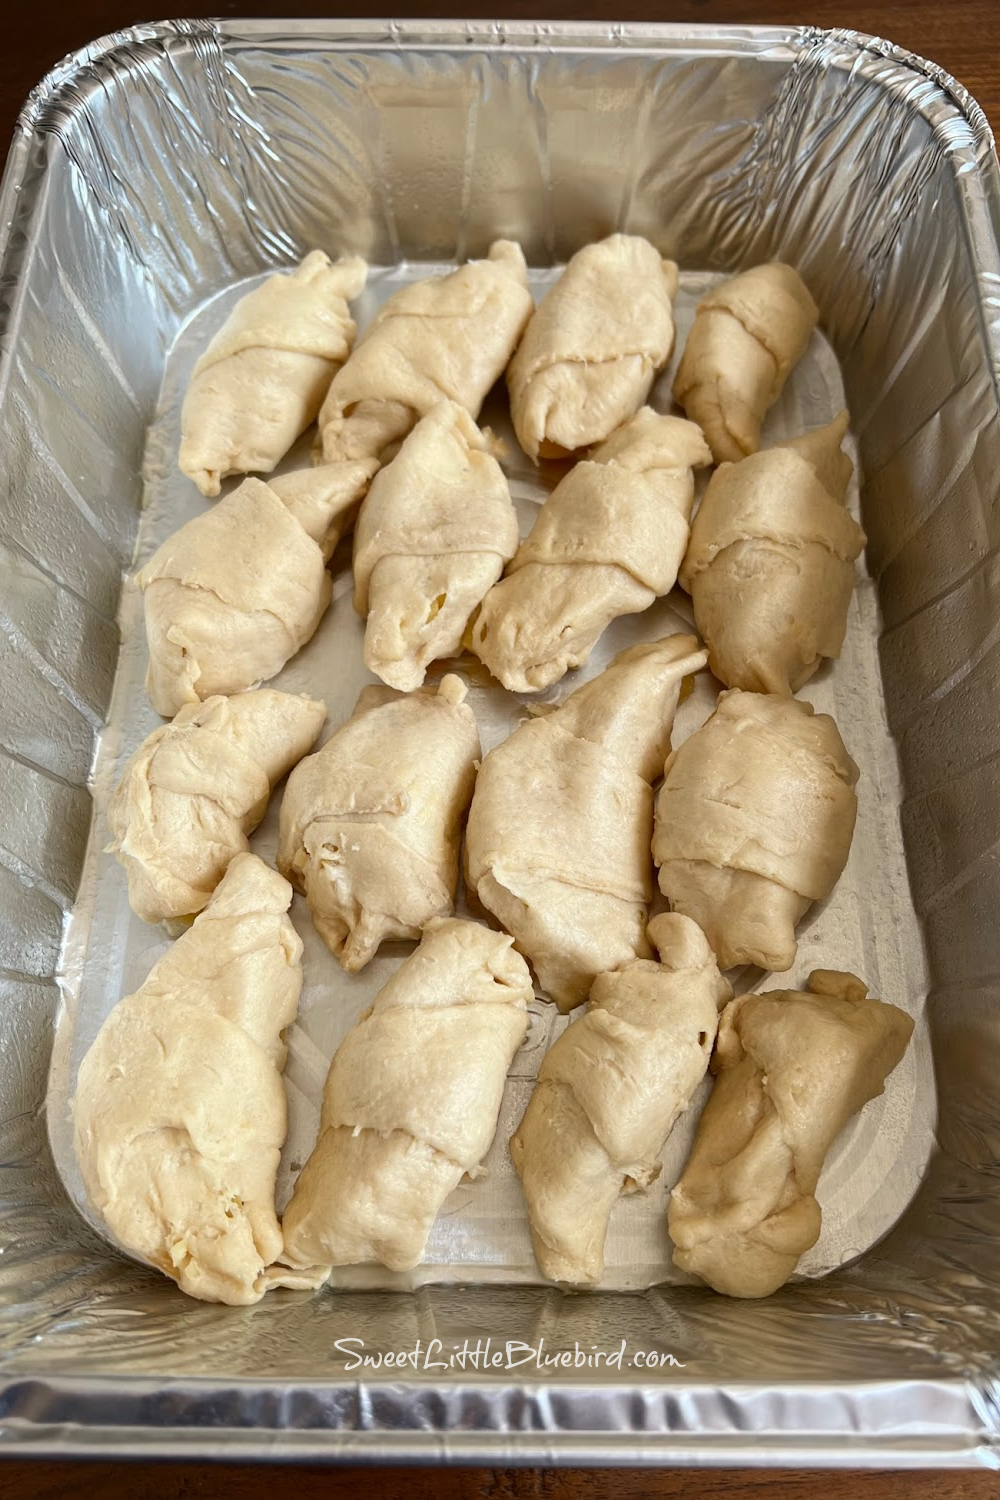 This photo shows the dumplings after rolling, placed in the baking pan.